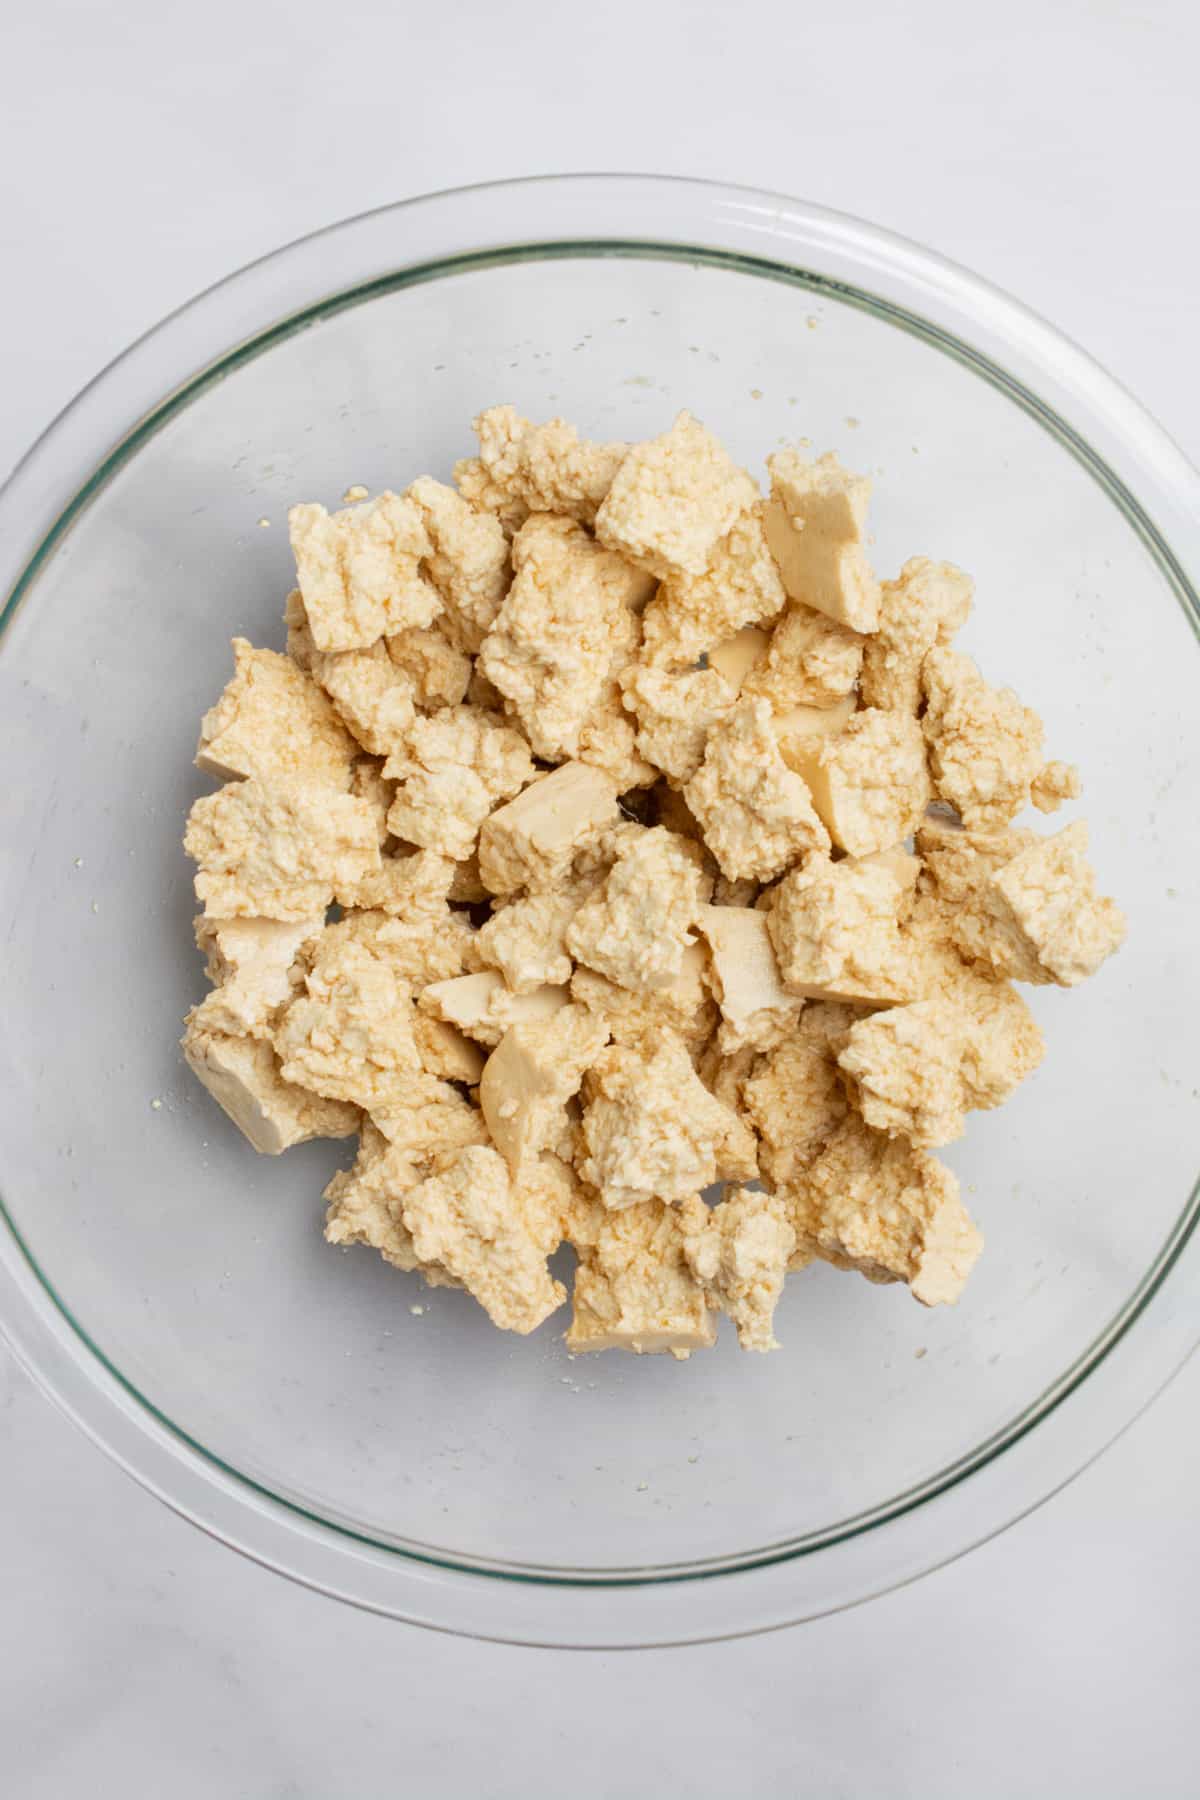 A glass bowl with chunks of tofu tossed with a soy sauce mix.